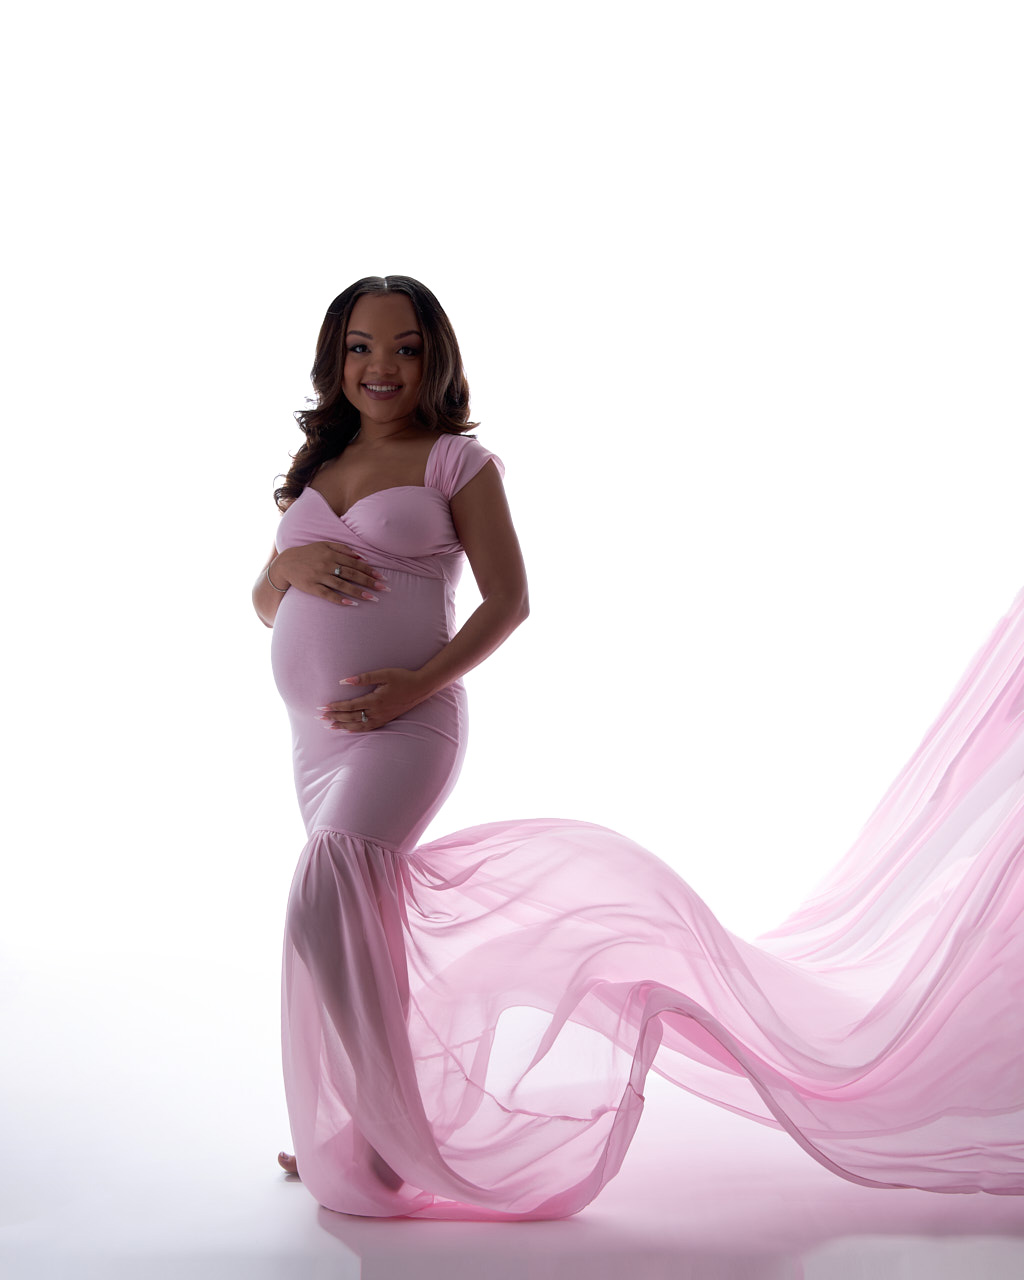 Pregnant woman of color in flowing pink fabric maternity outfit. Maternity portrait photographer near Washington DC  Portraits by Jared Wolfe in Alexandria VA